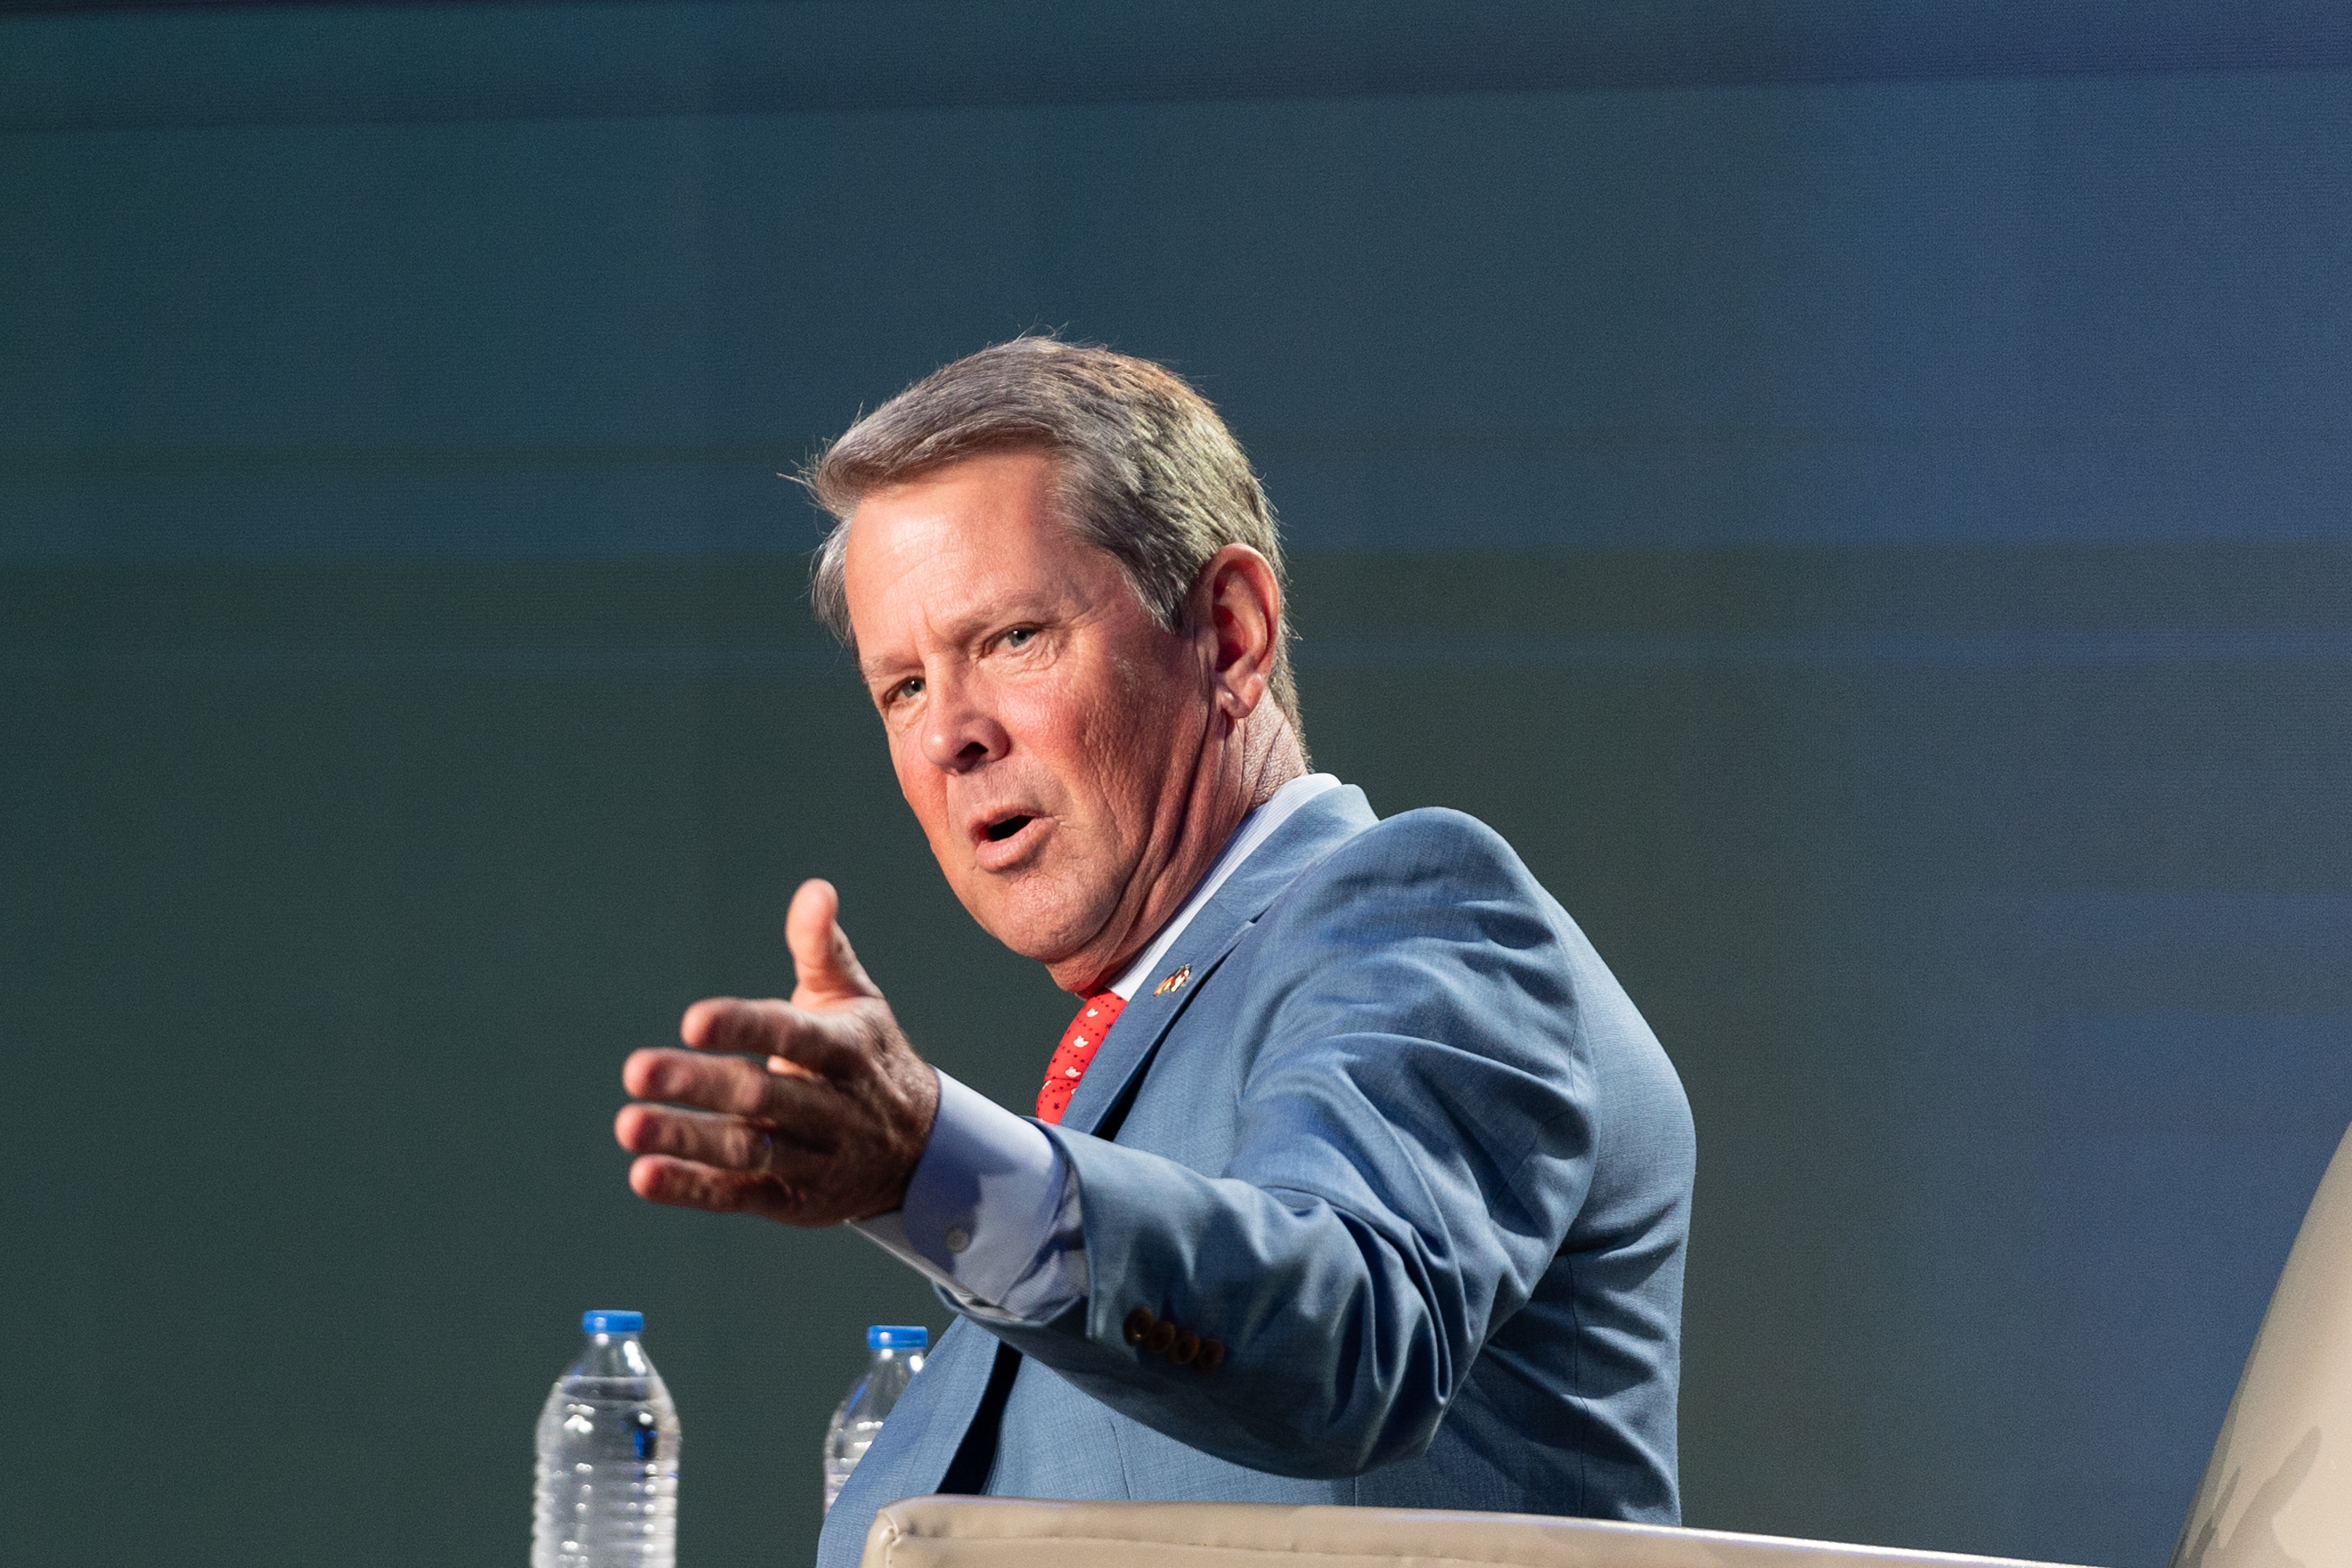 Conservative governors Kemp, Lee express support for IVF following Alabama ruling